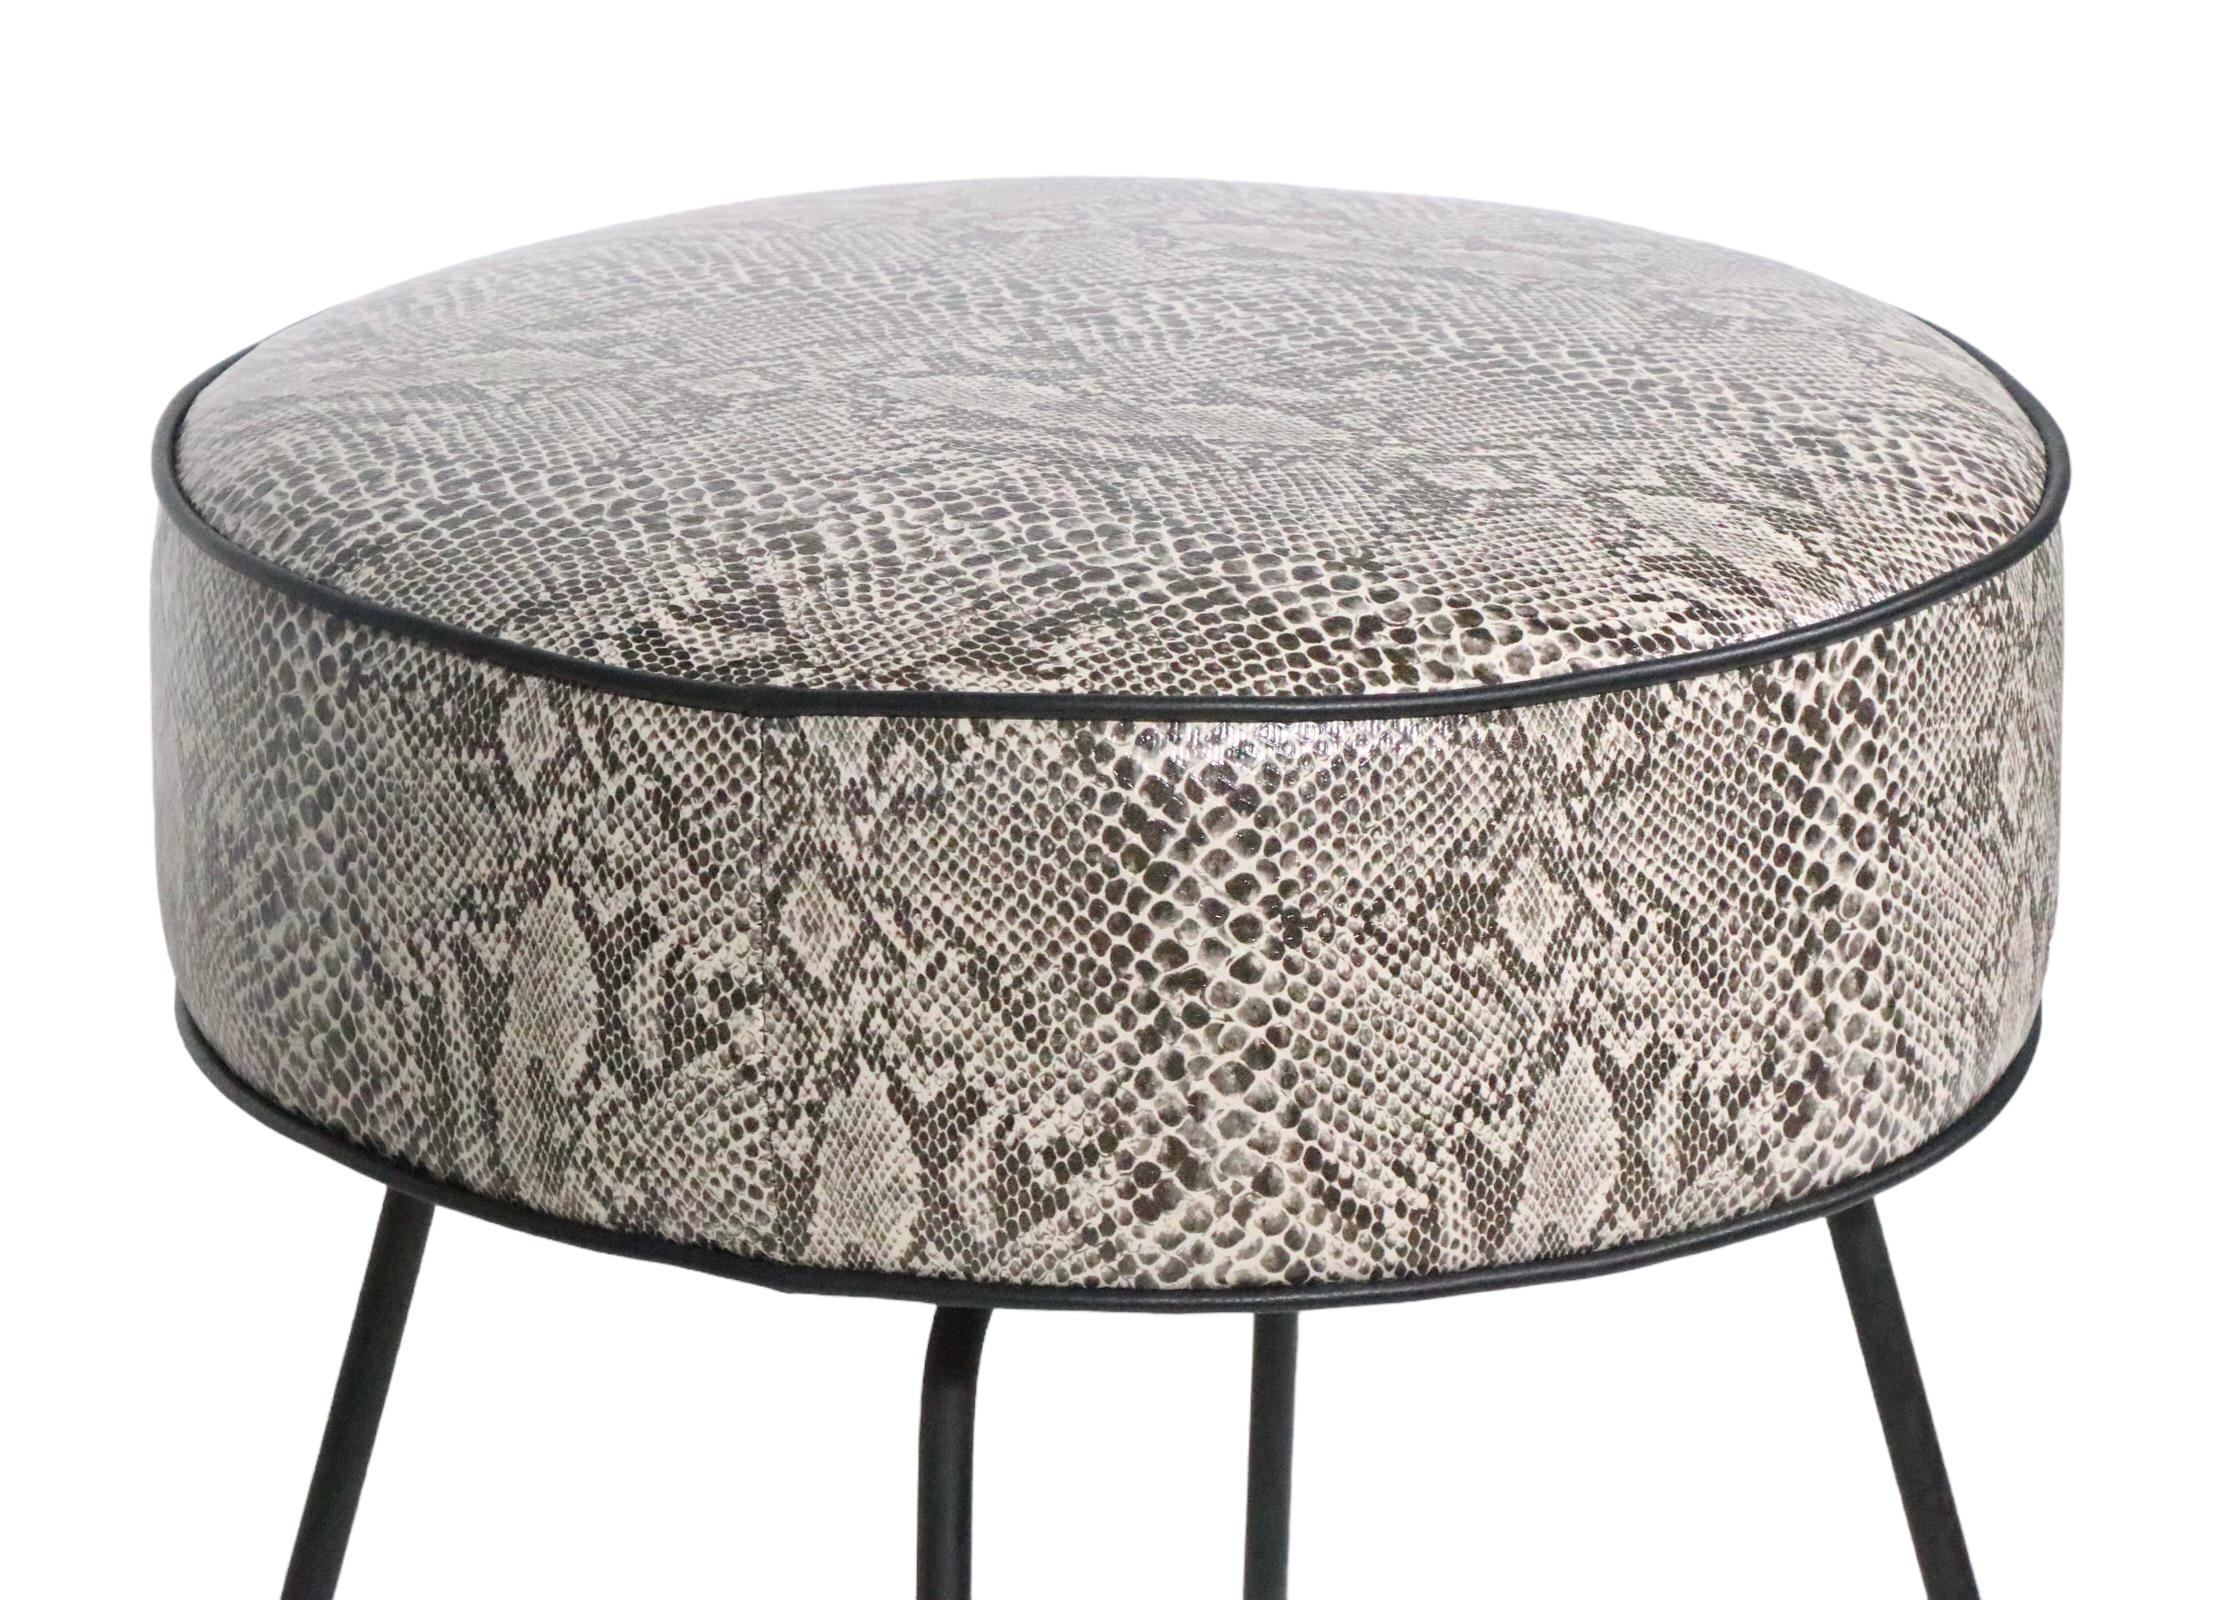 Voguish chic Mid Century, Hollywood Regency style foot stool, ottoman, pouf newly reupholstered in faux python black, gray and white vinyl with black leather piping, on black wrought iron legs. This stylish stool is in excellent clean, ready to use